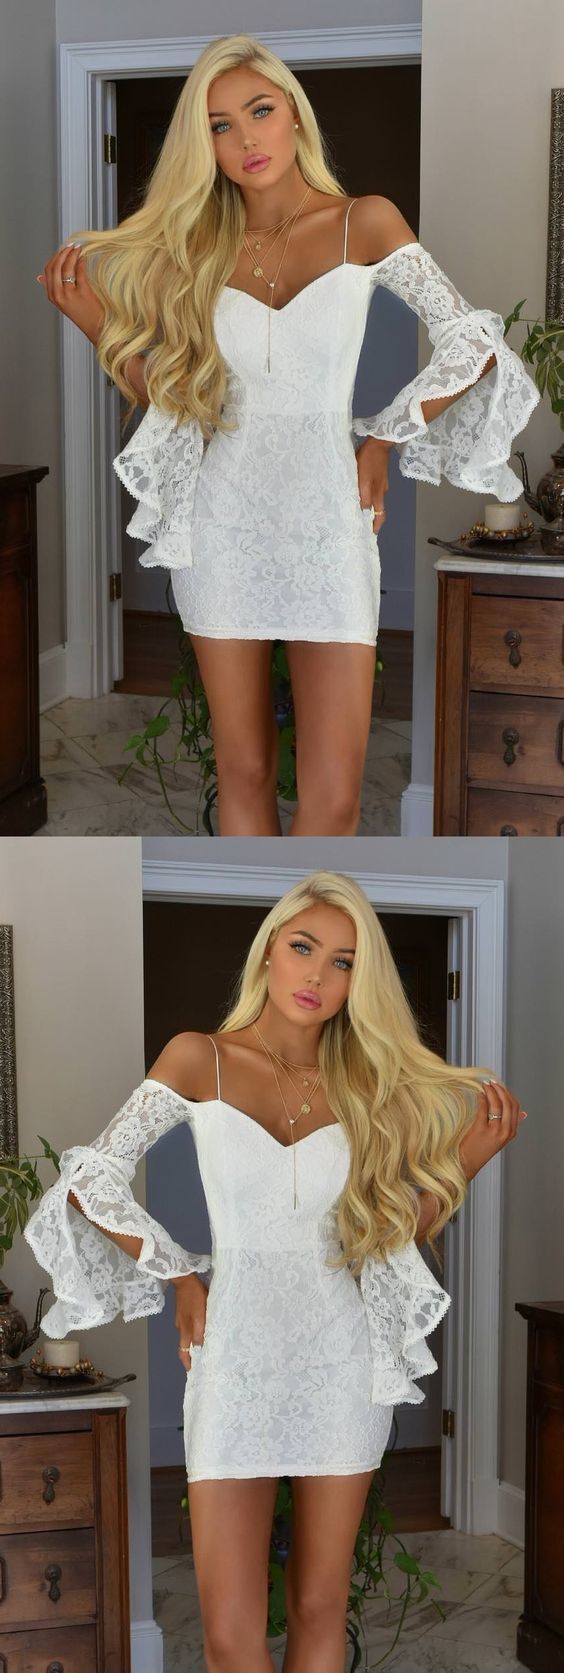 Sheath Off-the-Shoulder Bell Sleeves Short White Lace Homecoming Cocktail Dress -   15 dress Formal tight
 ideas